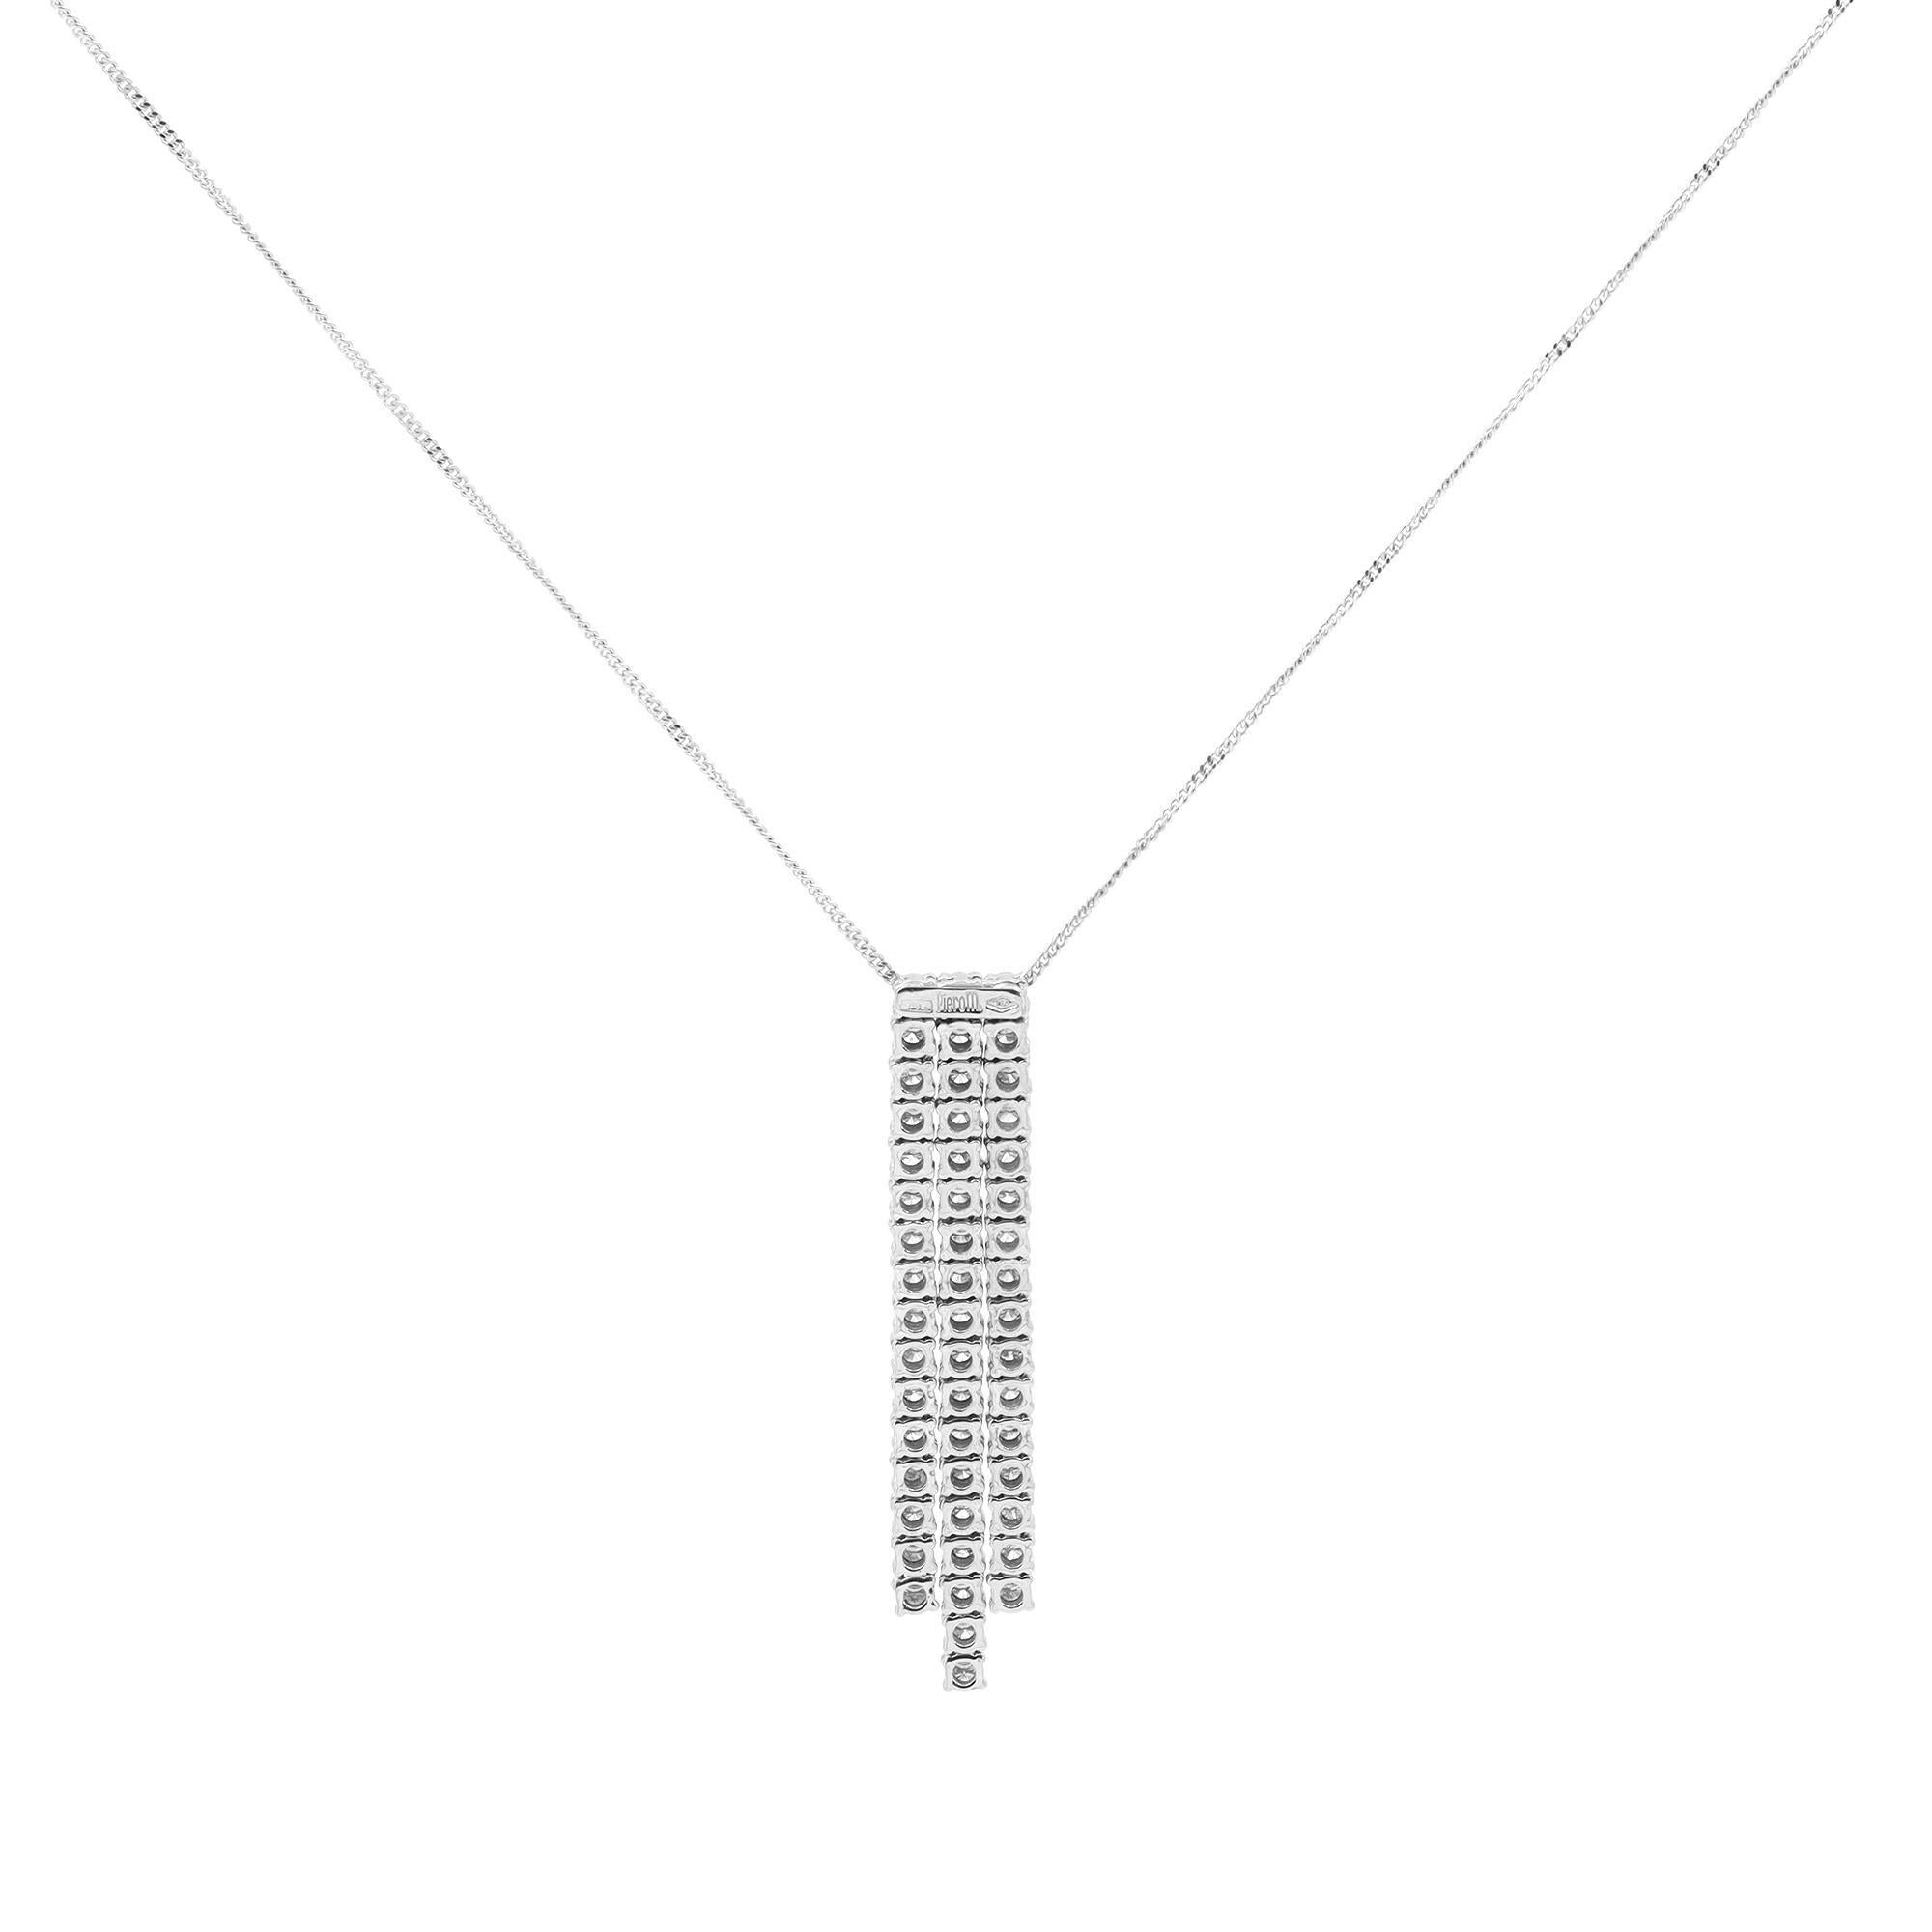 Piero Milano 3 Rows Natural Diamond 18K White Gold Pendant Necklace. This Elegant Necklace is 16 inches long. Weights is 8 grams and it features a total of 1.68 carats of natural round cut diamonds. Diamond color G-H and VS-SI clarity. Comes with an